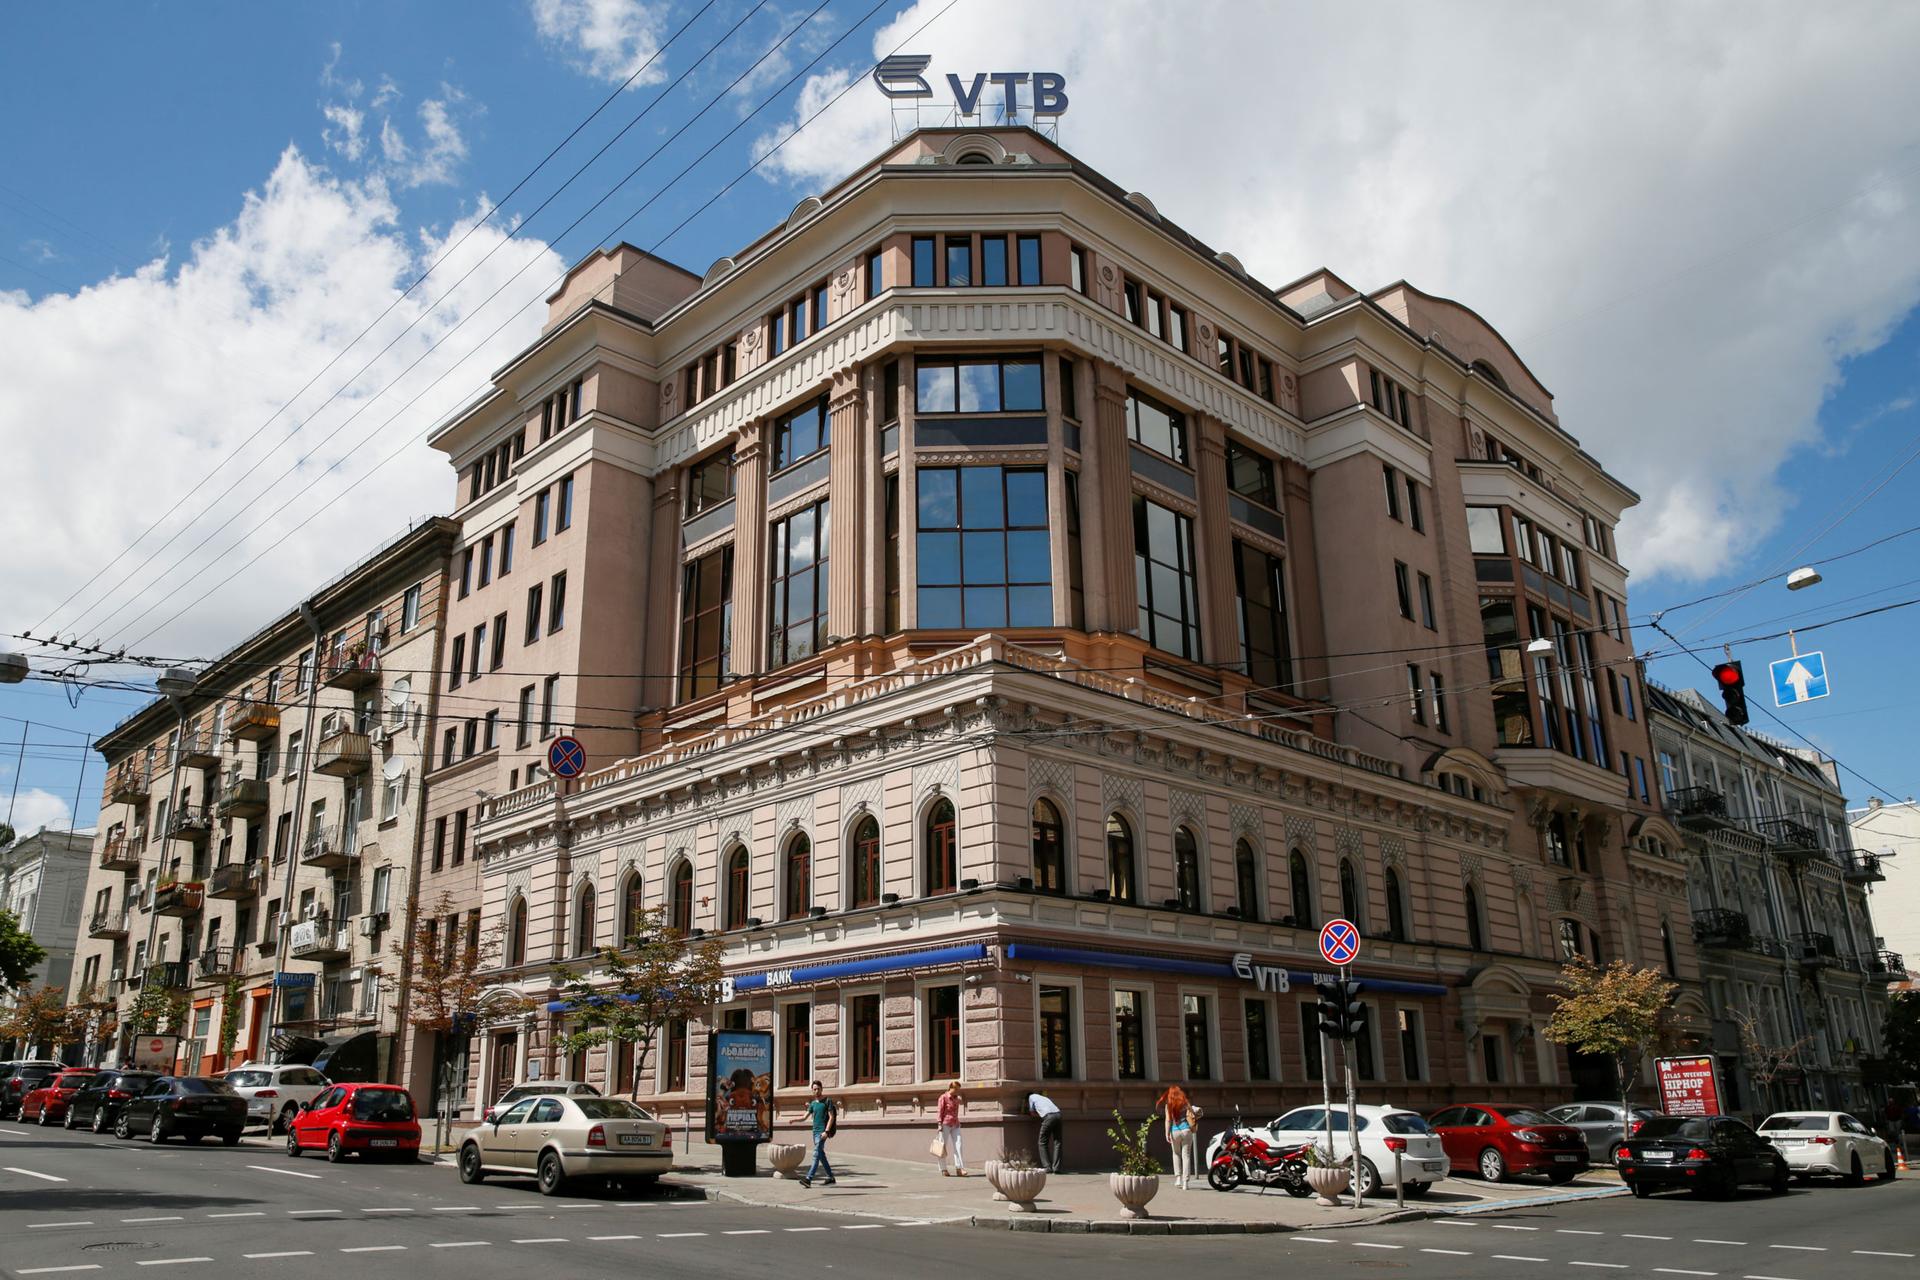 A older brick building is on the corner of a street. Atop the building is the logo for VTB bank.